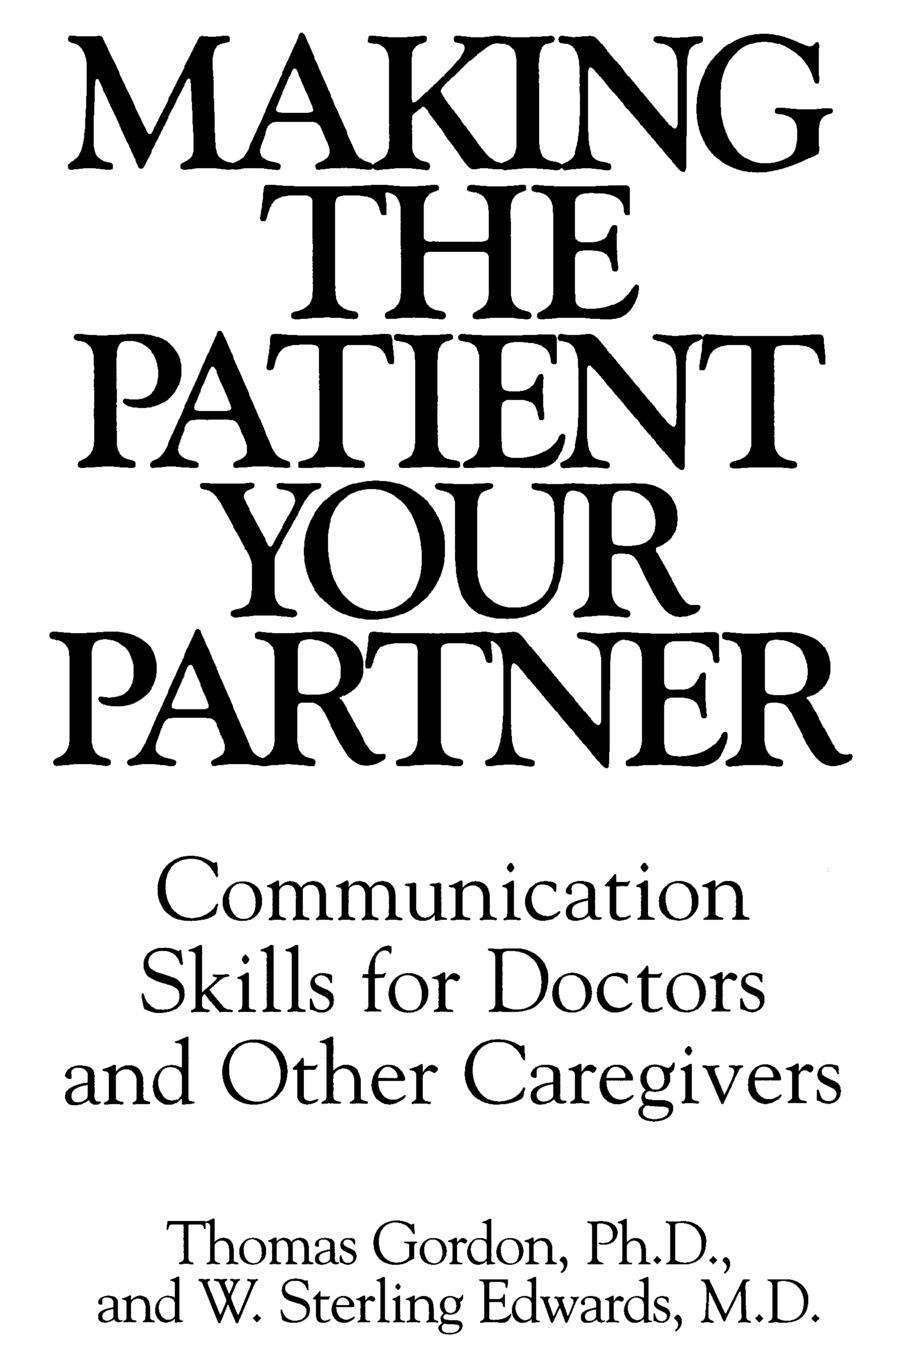 Making the Patient Your Partner. Communication Skills for Doctors and Other Caregivers